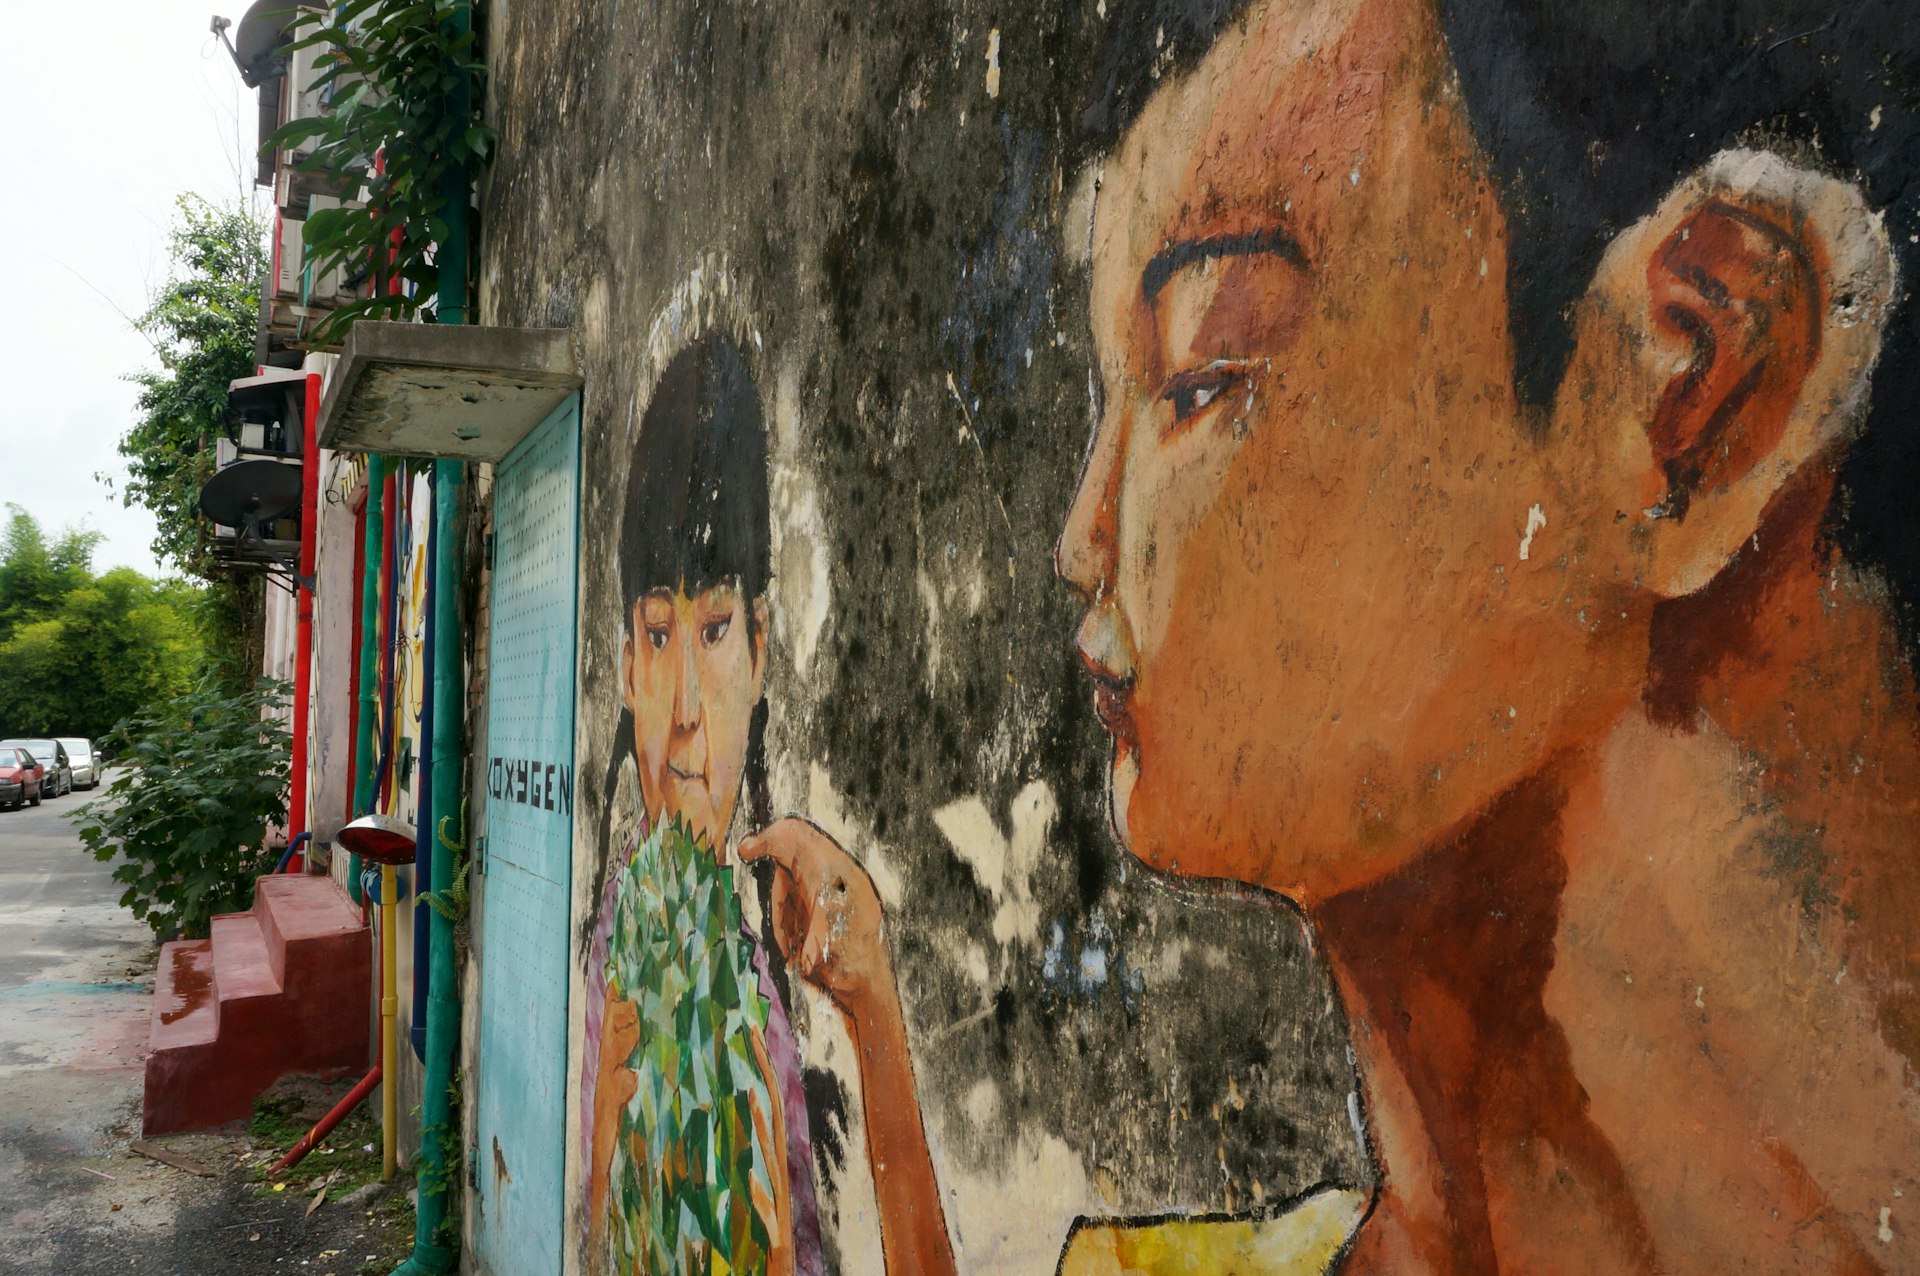 Walls become artworks in Ipoh © Anita Isalska / Lonely Planet